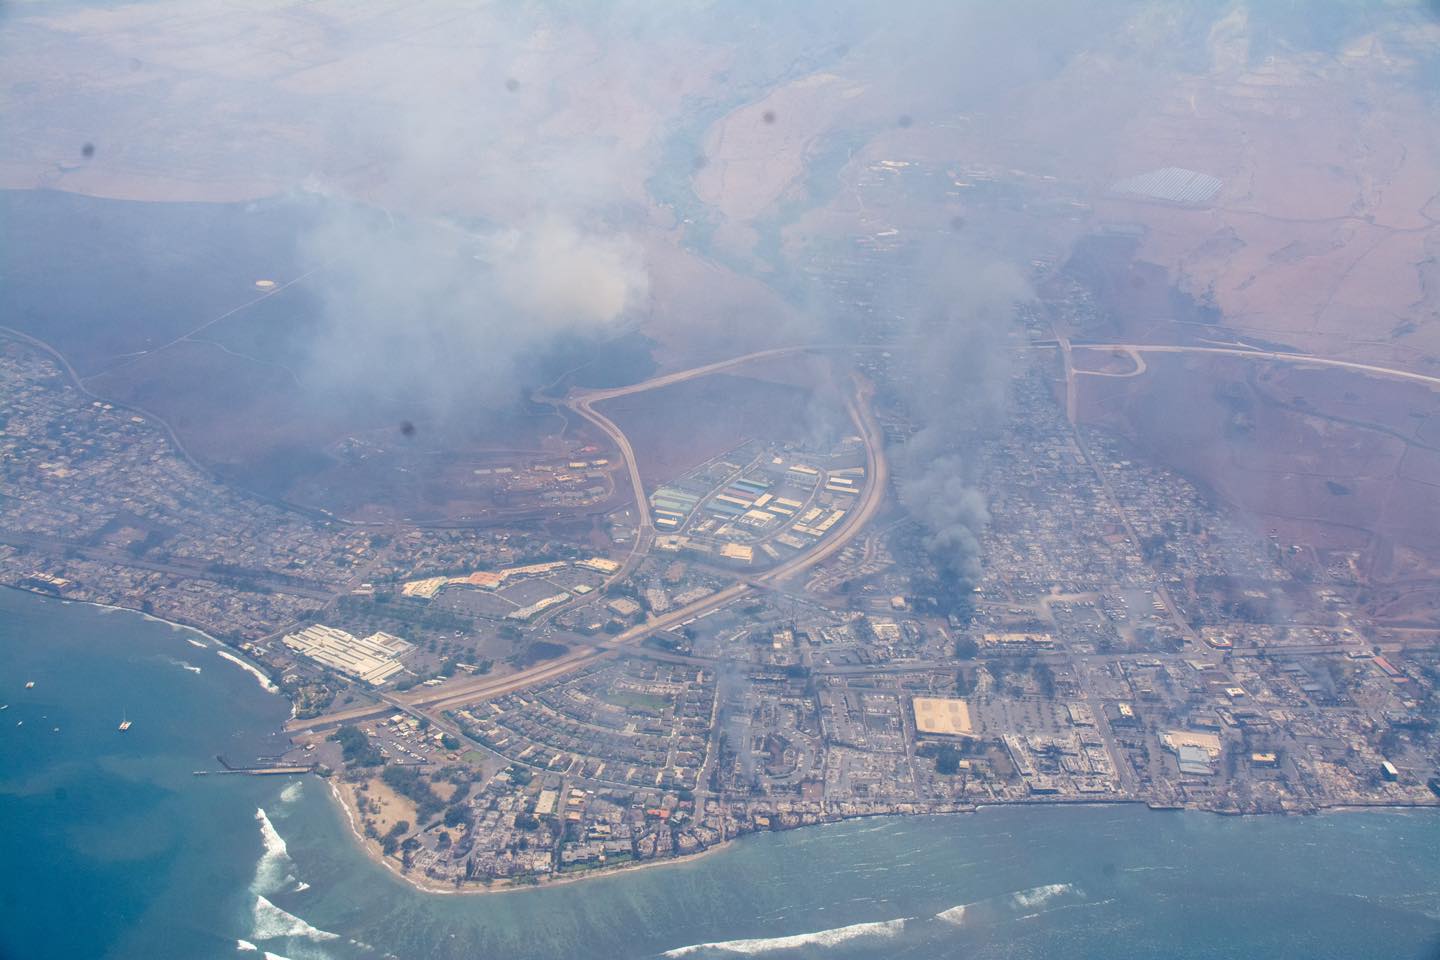 Lahaina 'Wiped Off the Map' by Maui Wildfire, Video Shows